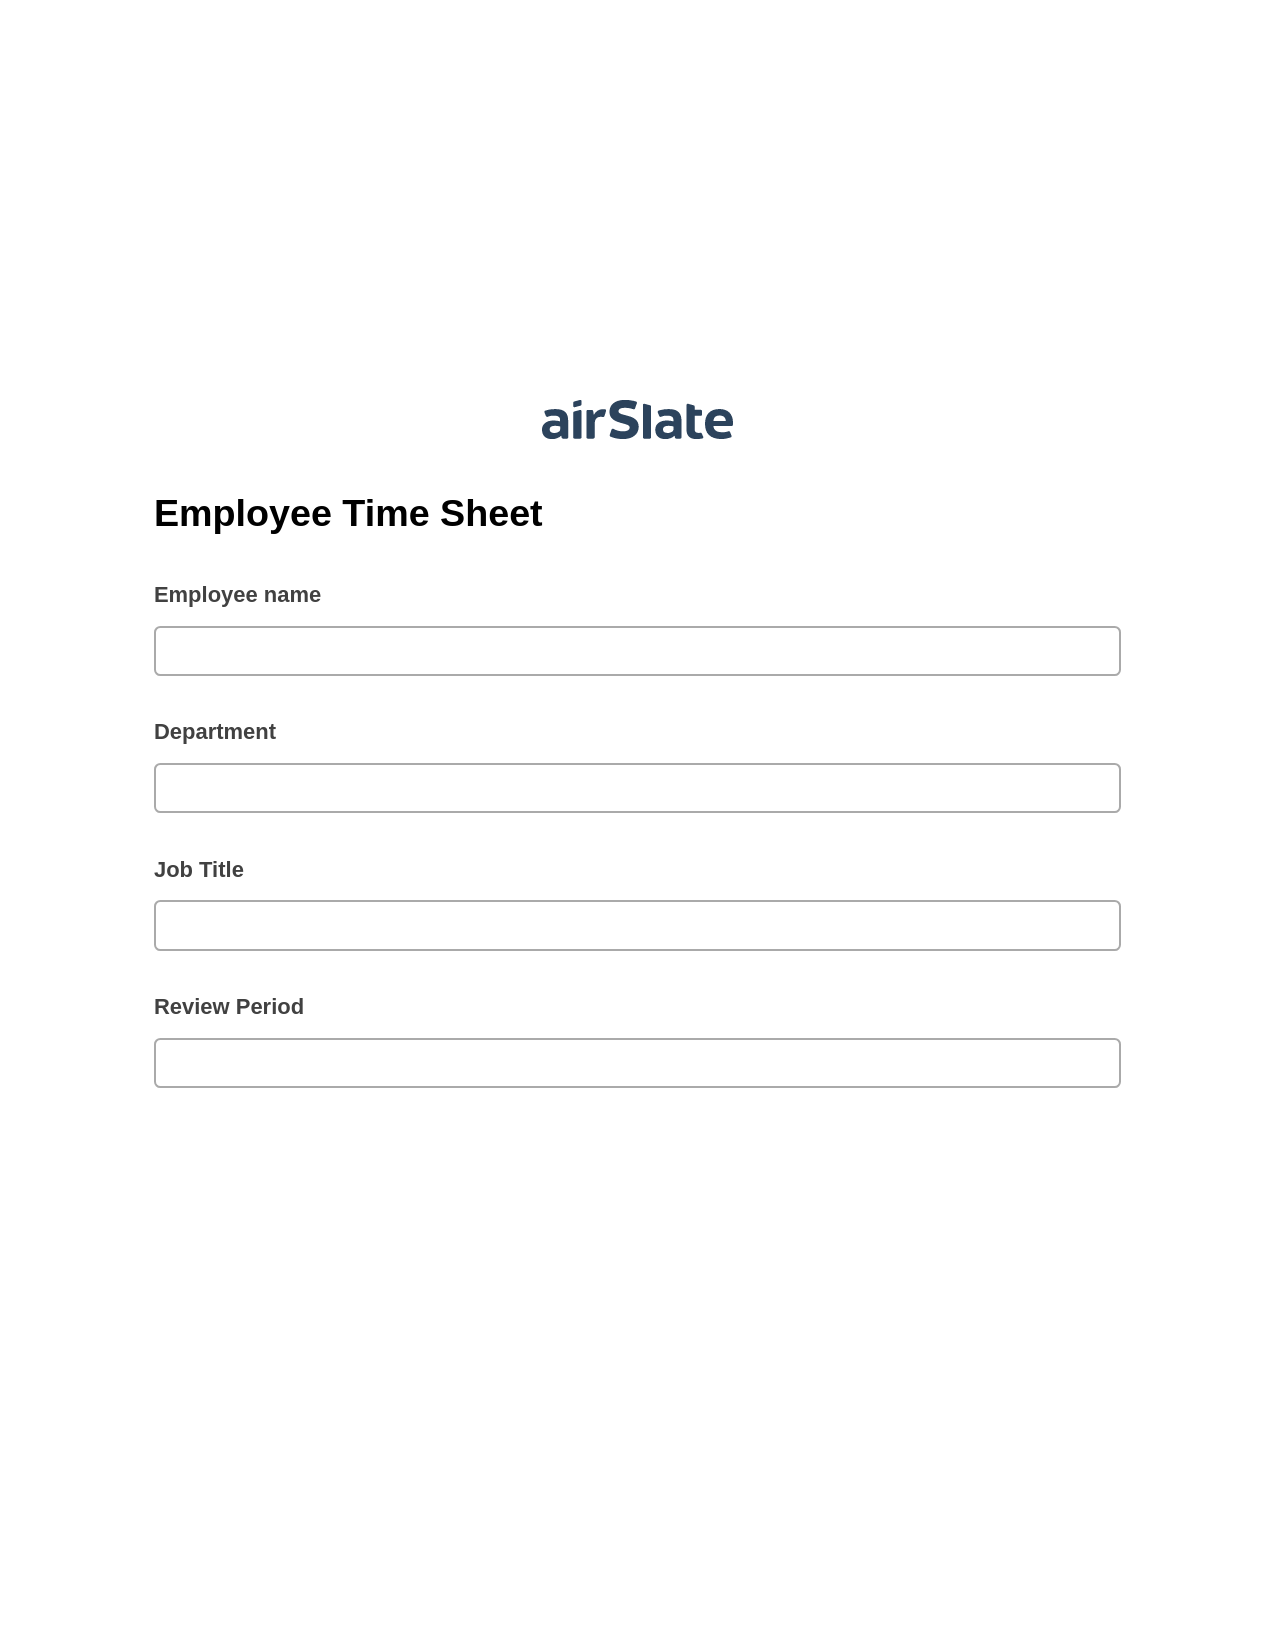 Multirole Employee Time Sheet System Bot - Slack Two-Way Binding Bot, Assign Roles to Recipients Bot, Slack Two-Way Binding Bot